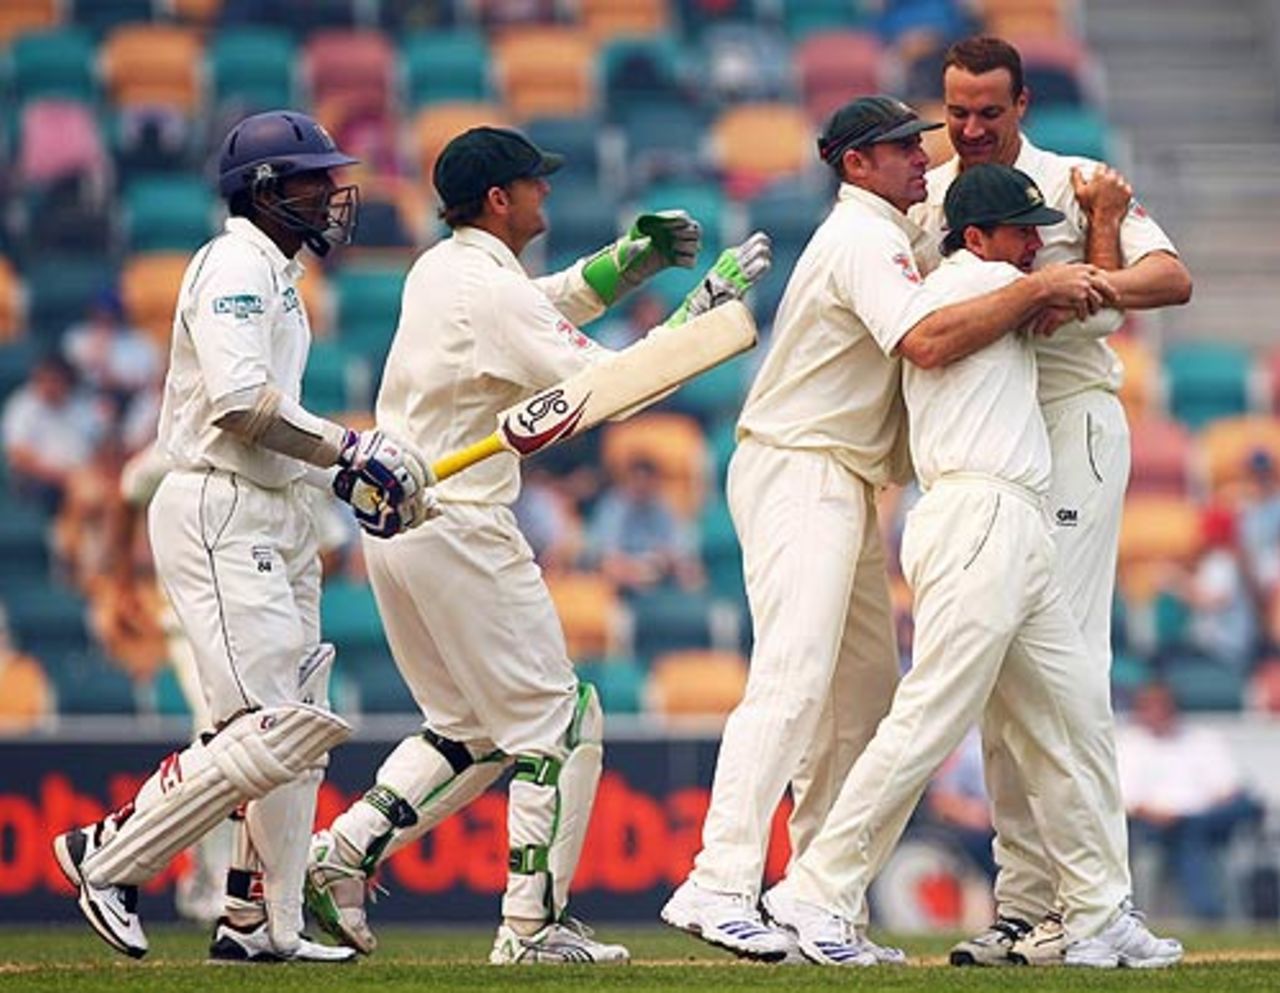 Stuart Clark is congratulated after removing Kumar Sangakkara, who was unlucky to be given out caught off his shoulder, Australia v Sri Lanka, 2nd Test, Hobart, 5th day, November 20, 2007